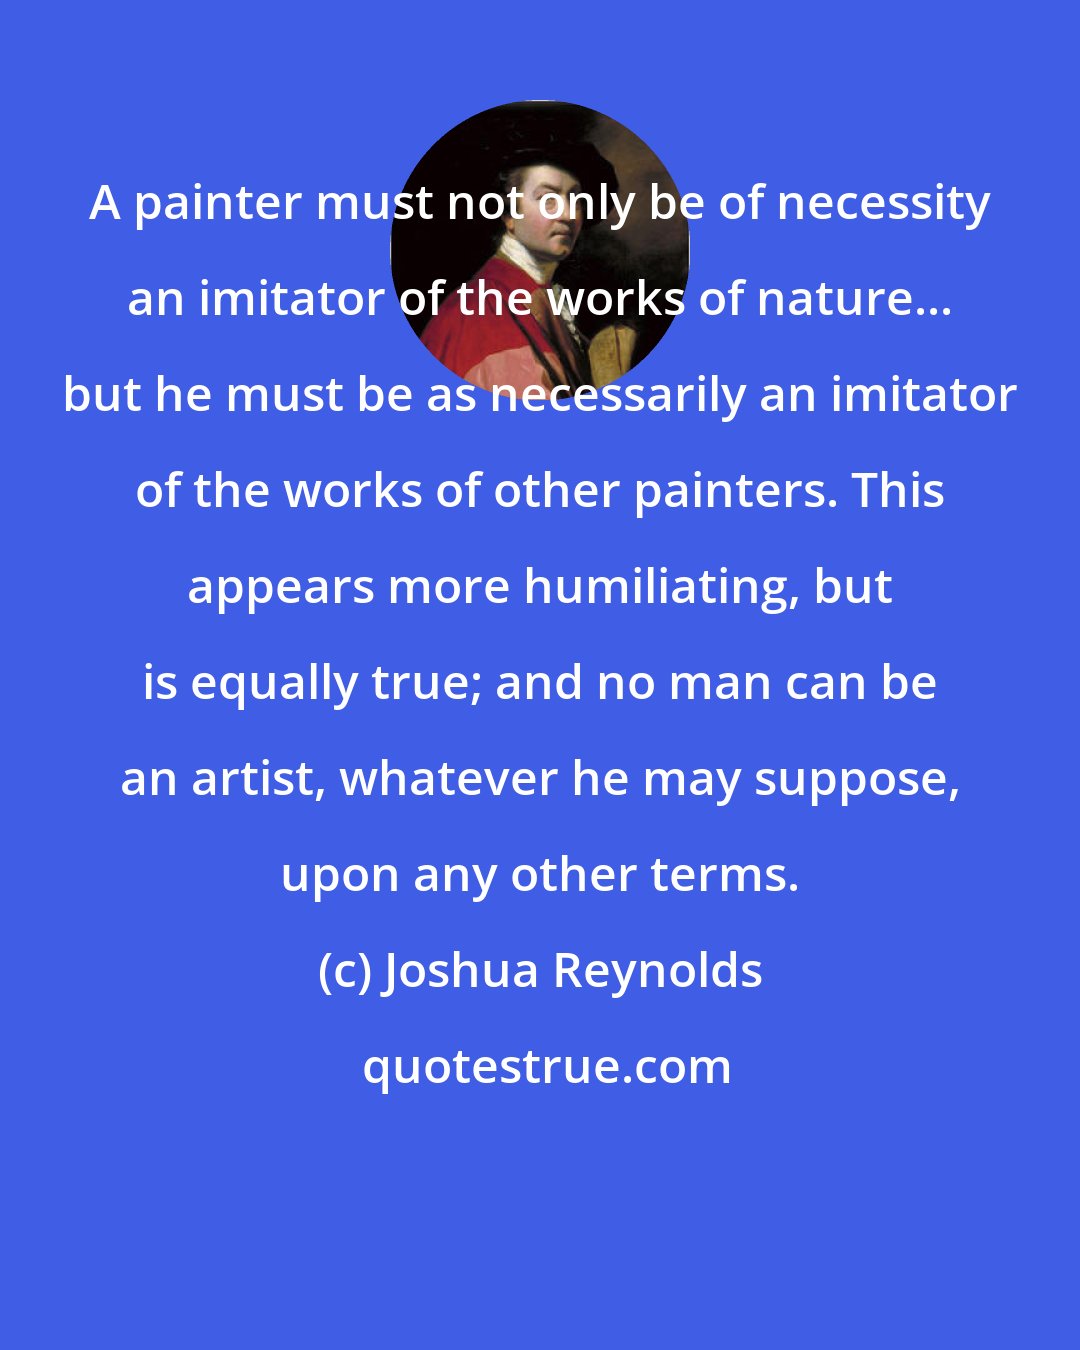 Joshua Reynolds: A painter must not only be of necessity an imitator of the works of nature... but he must be as necessarily an imitator of the works of other painters. This appears more humiliating, but is equally true; and no man can be an artist, whatever he may suppose, upon any other terms.